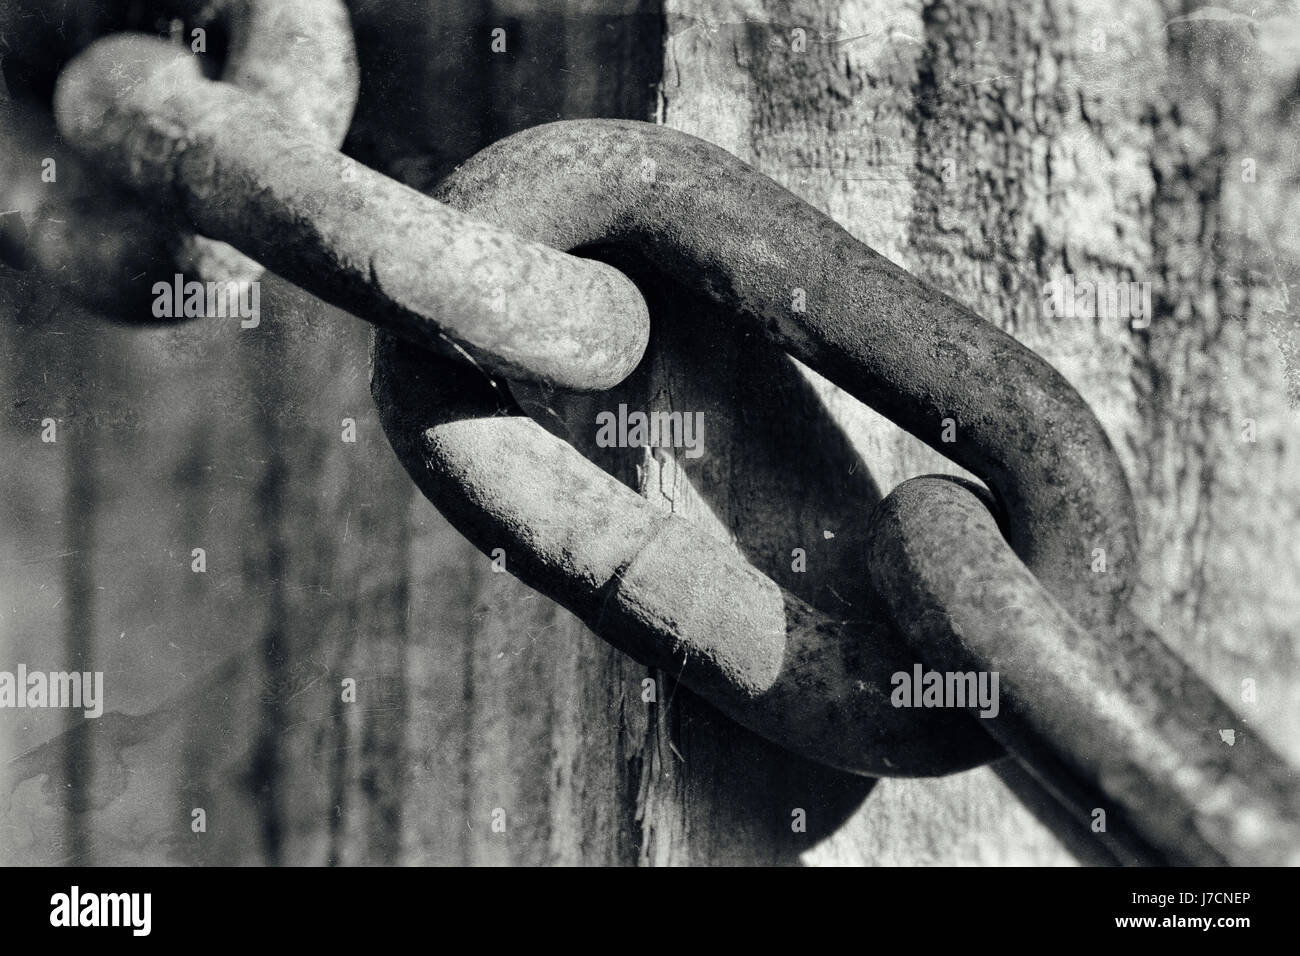 Close up of rusty metal chain links Stock Photo